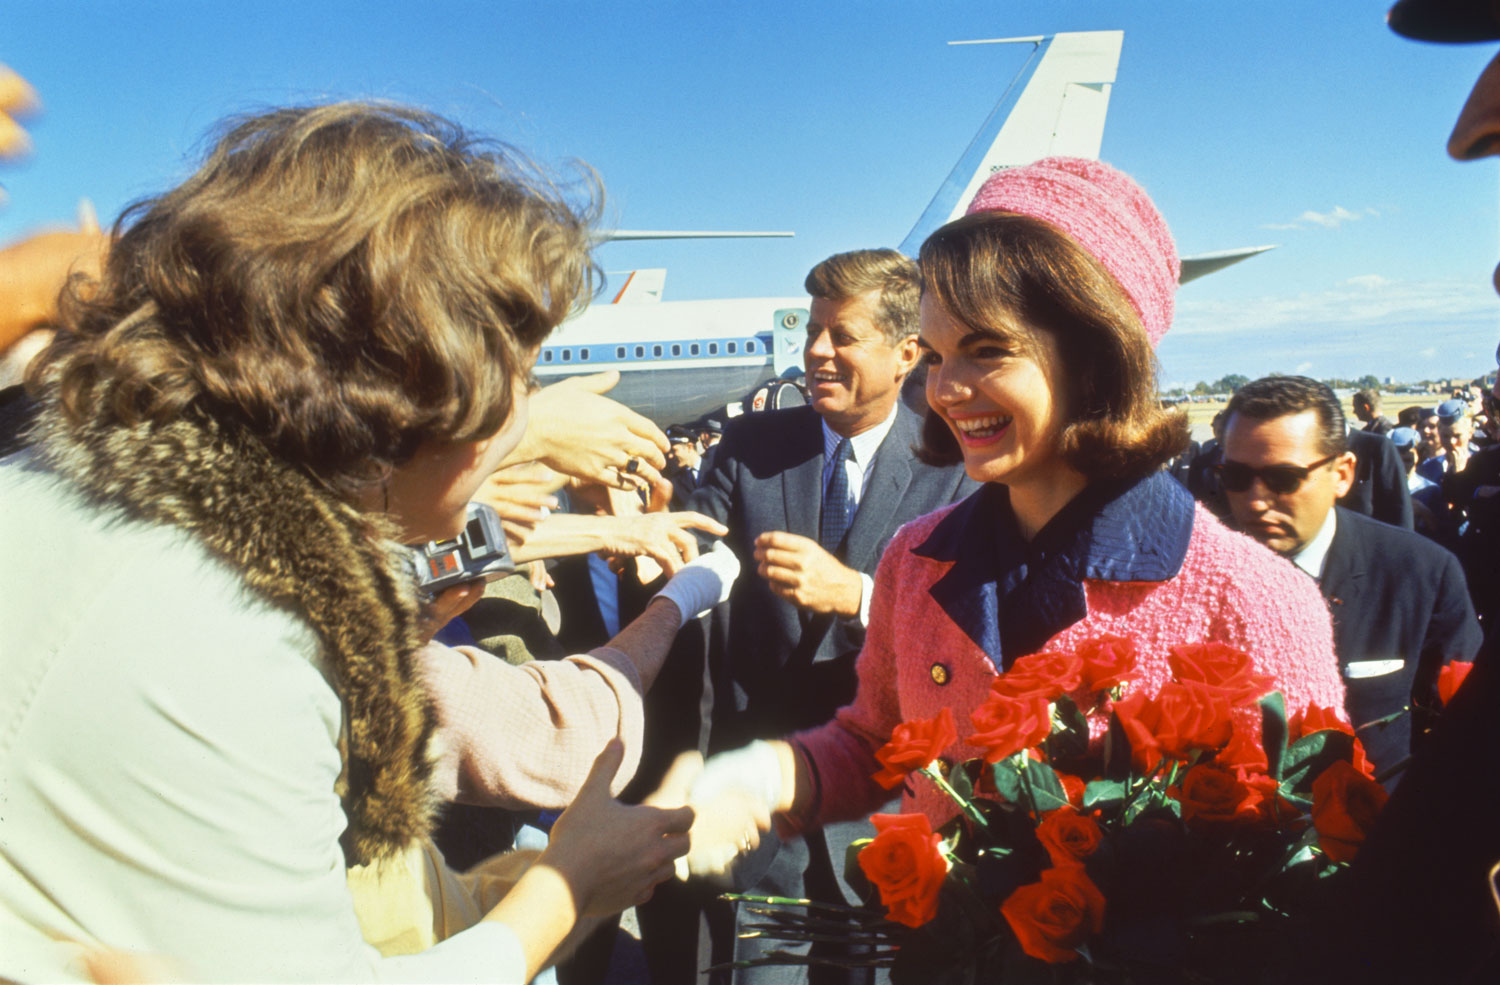 John and Jackie Kennedy at Love Field in Dallas, Texas, on November 22, 1963.